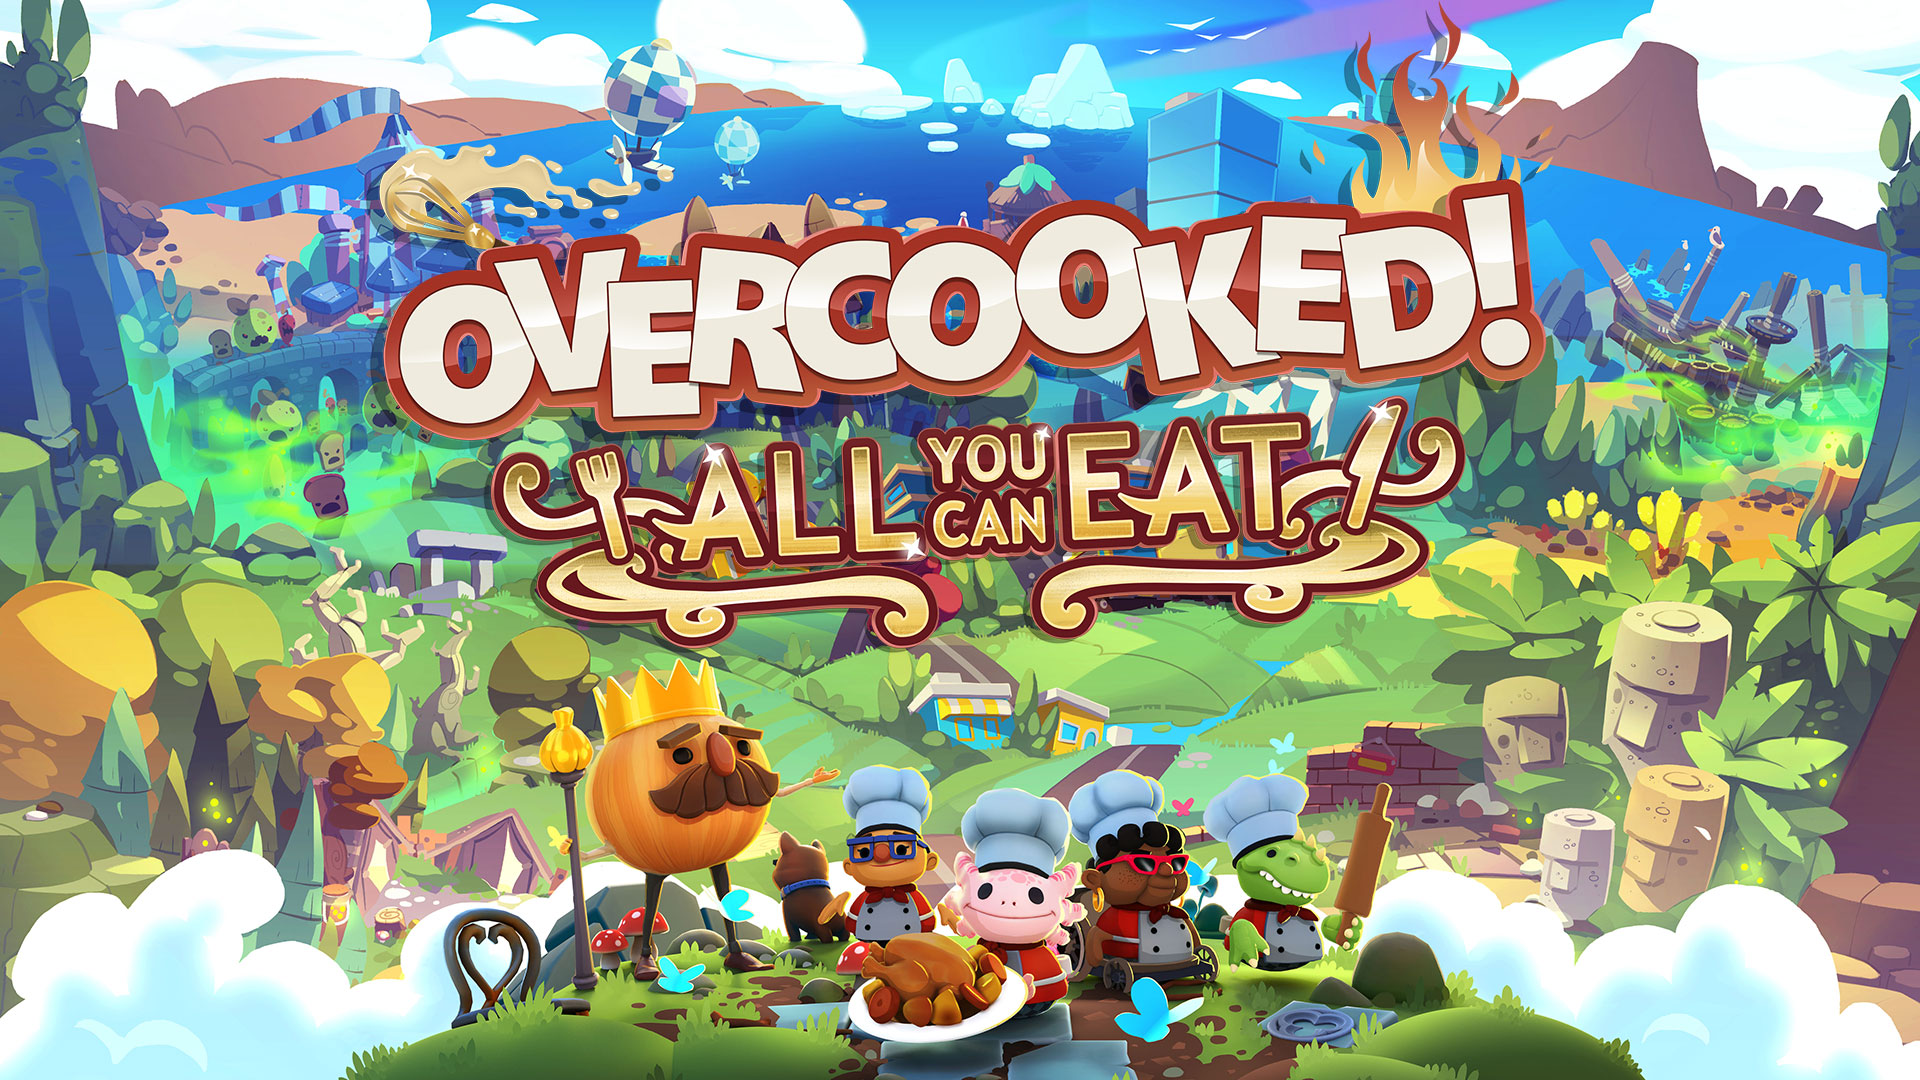 Overcooked LOW COST | PS4